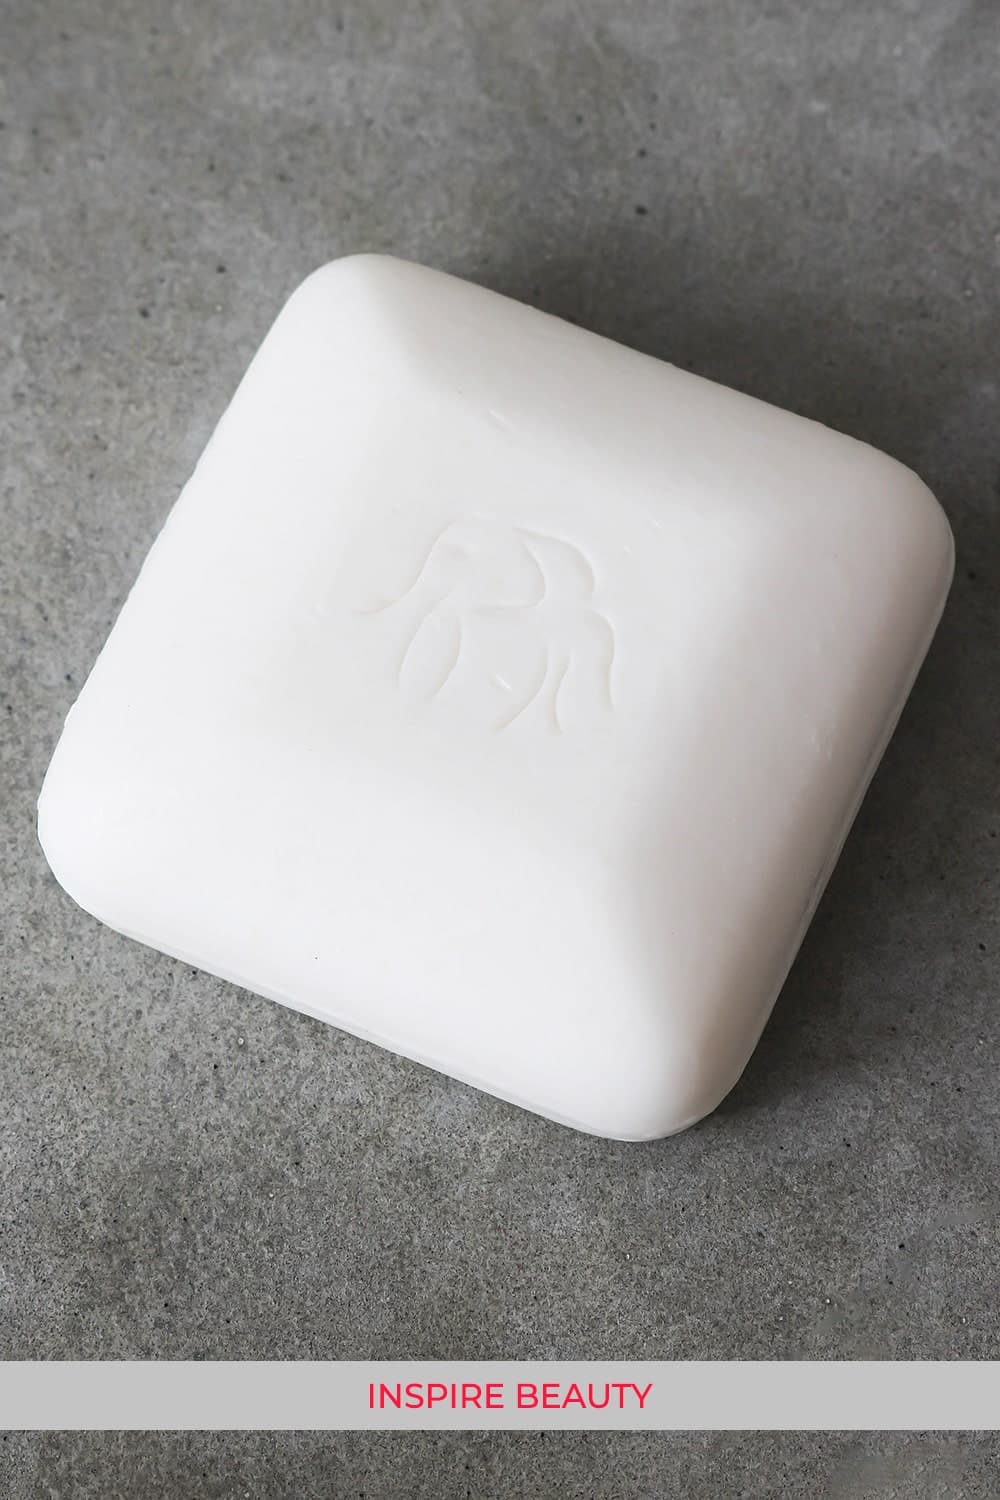 Drunk Elephant Pekee Bar review, this cleansing bar is brightening and gentle, best suited for normal and oily skin types